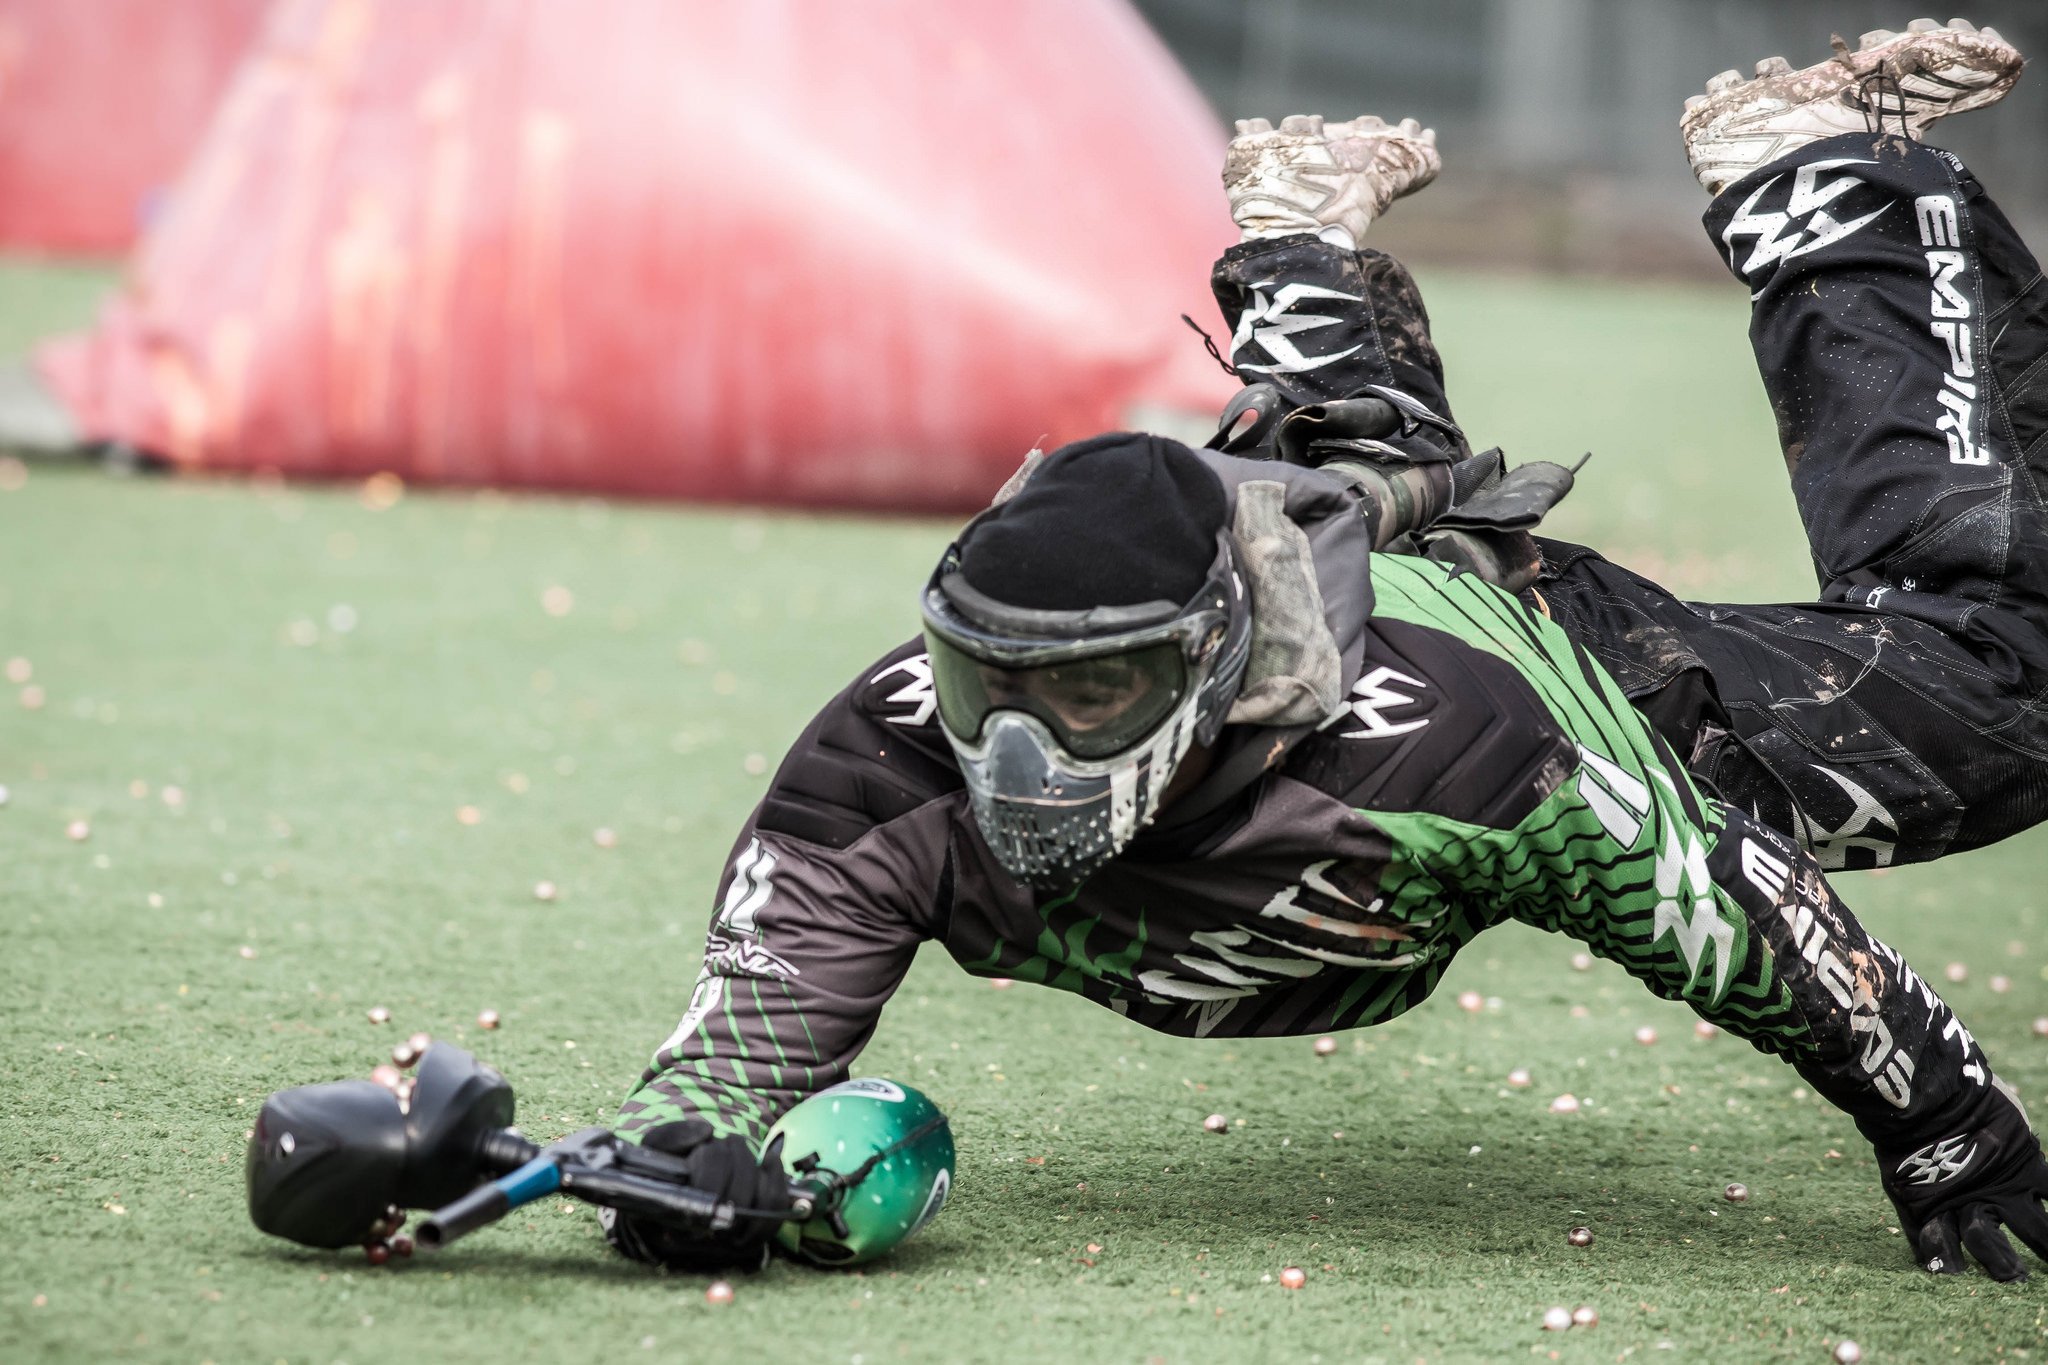 paintball - conditioning